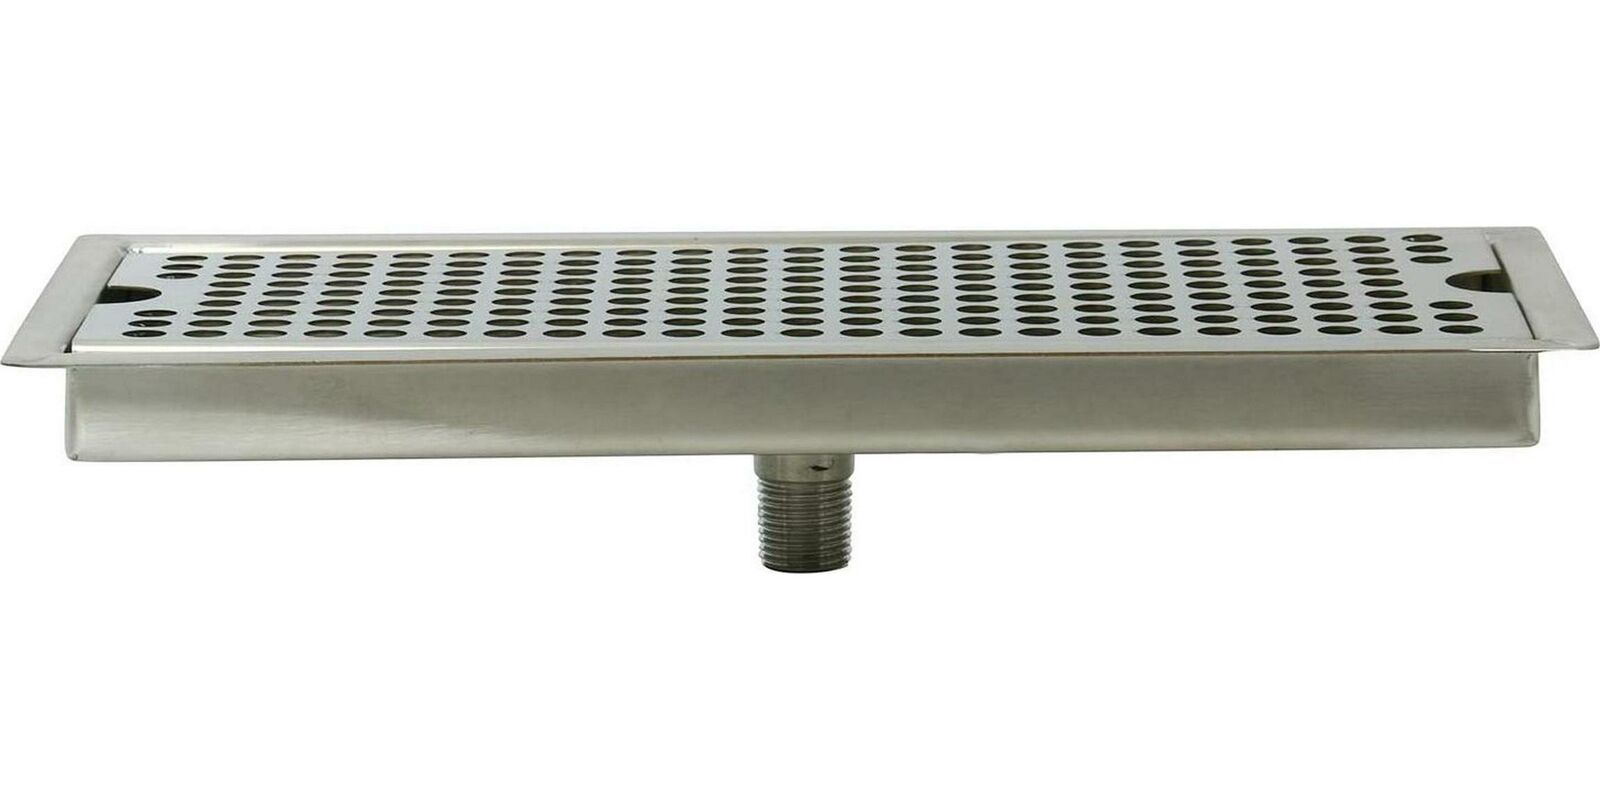 Homend Stainless Steel Drip Tray,flush Mount Beer Drip Tray With Drain 12 L X 5